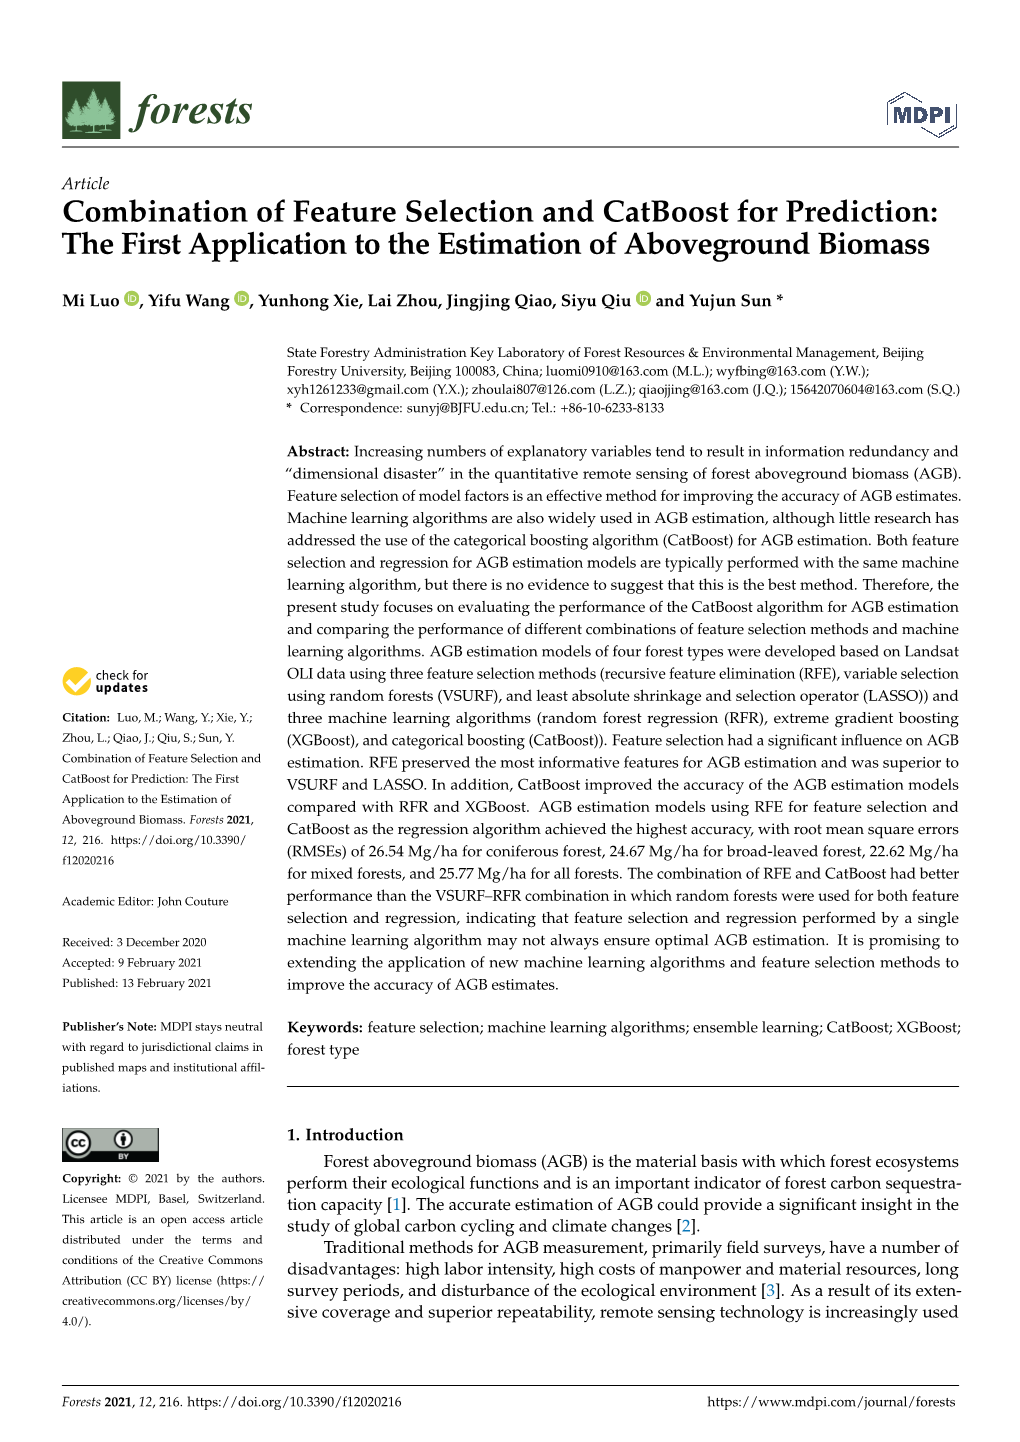 Combination of Feature Selection and Catboost for Prediction: the First Application to the Estimation of Aboveground Biomass